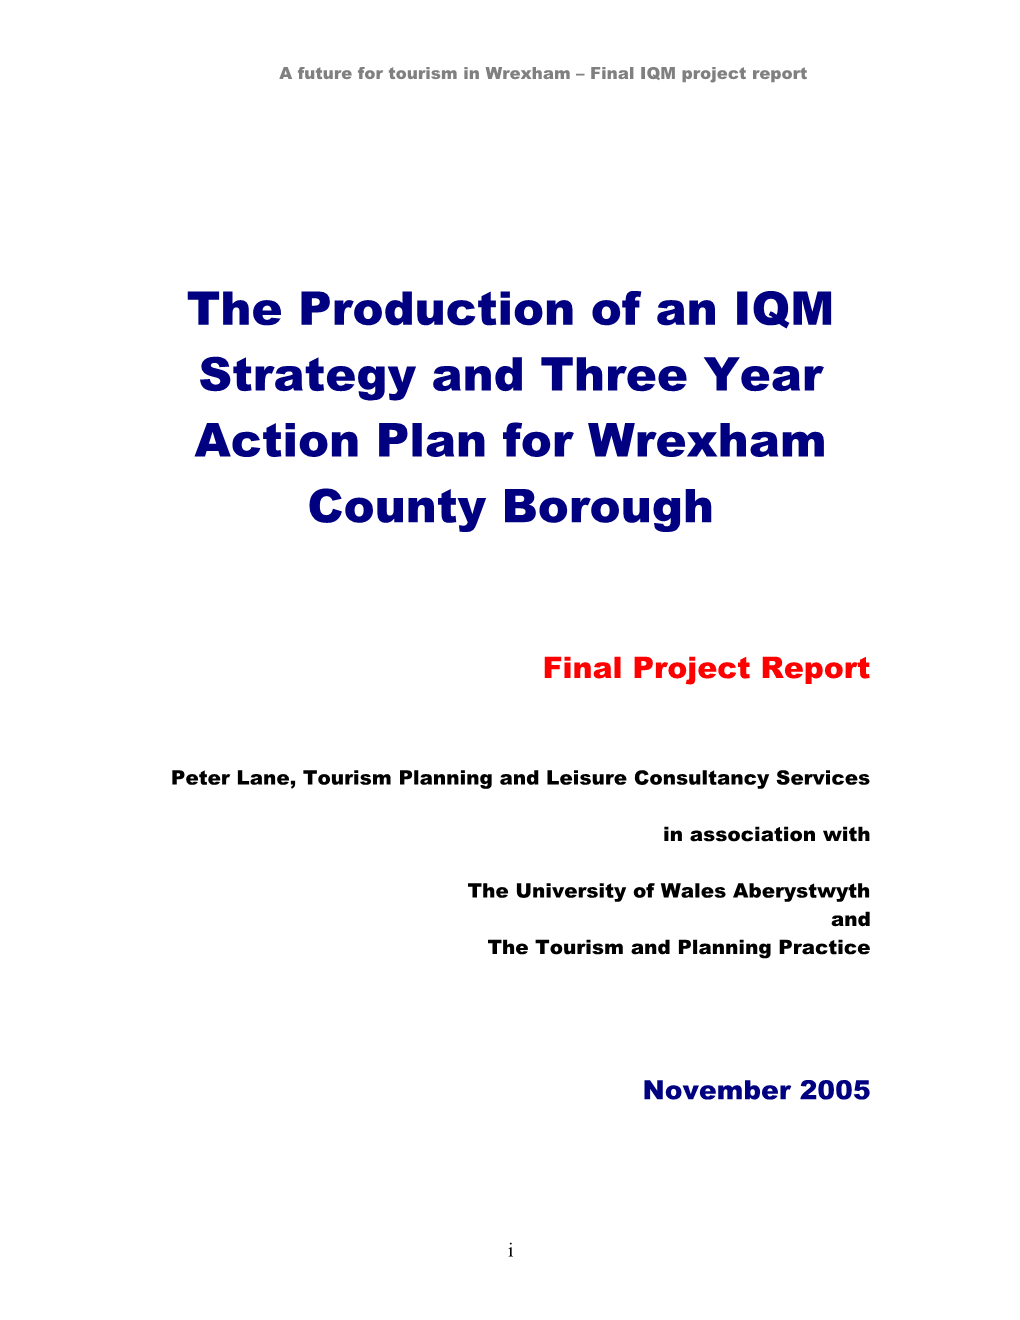 A Future for Tourism in Wrexham Final IQM Project Report